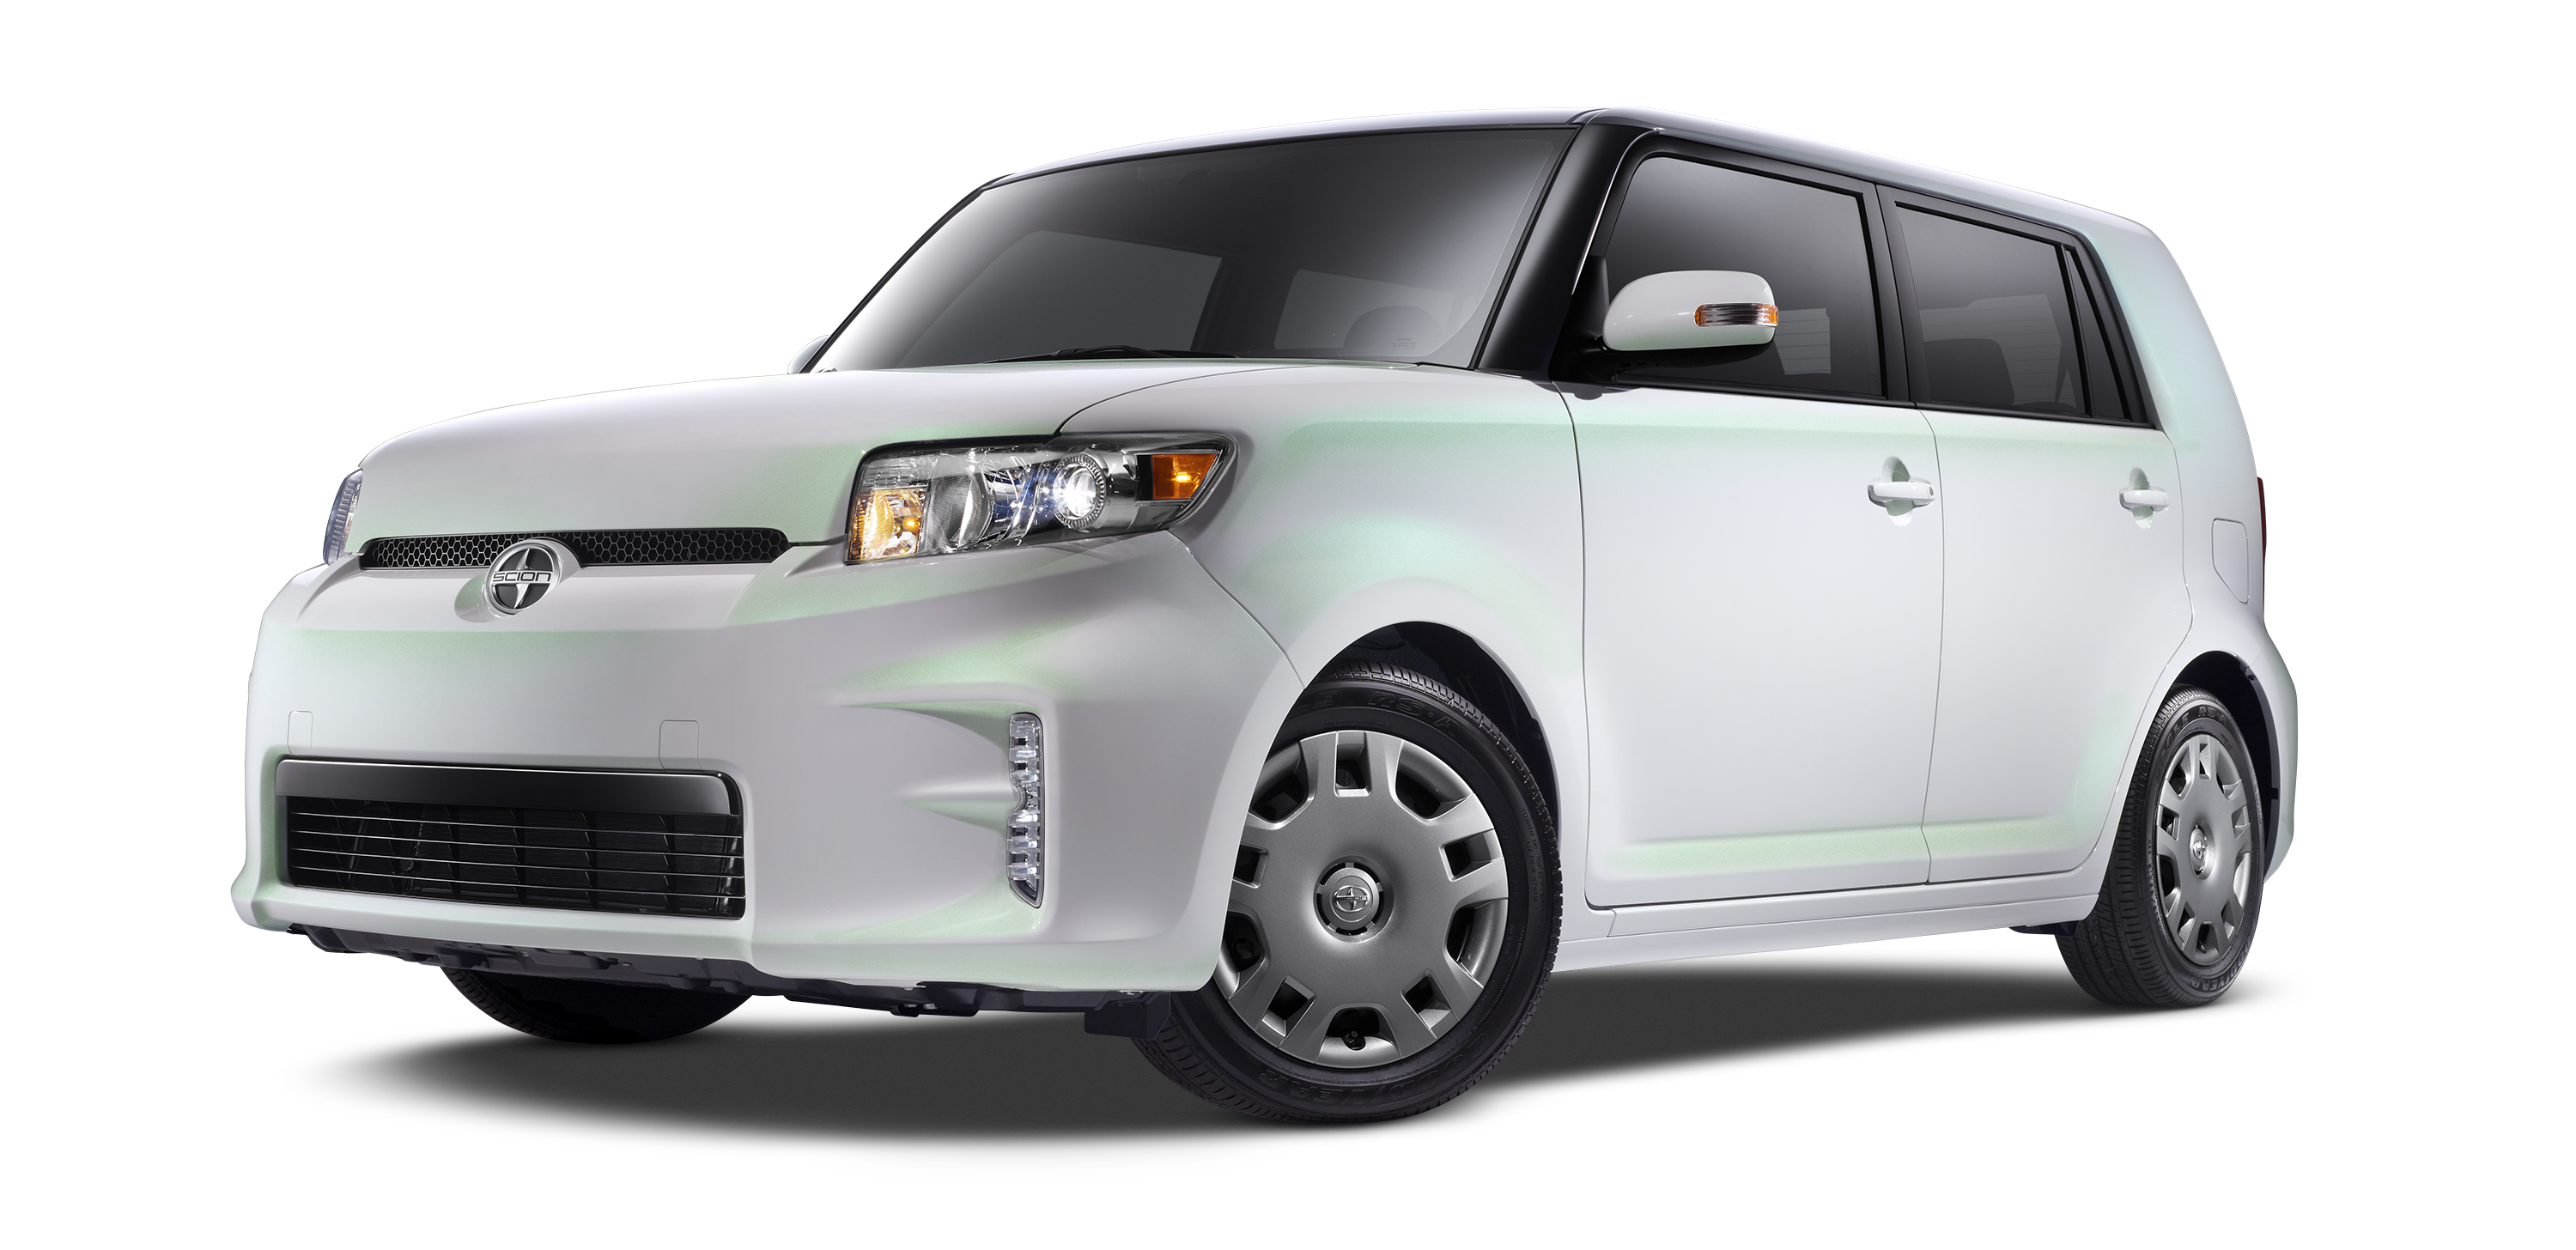 Scion xB Release Series 10.0 Infused With Techie Style - Toyota USA Newsroom